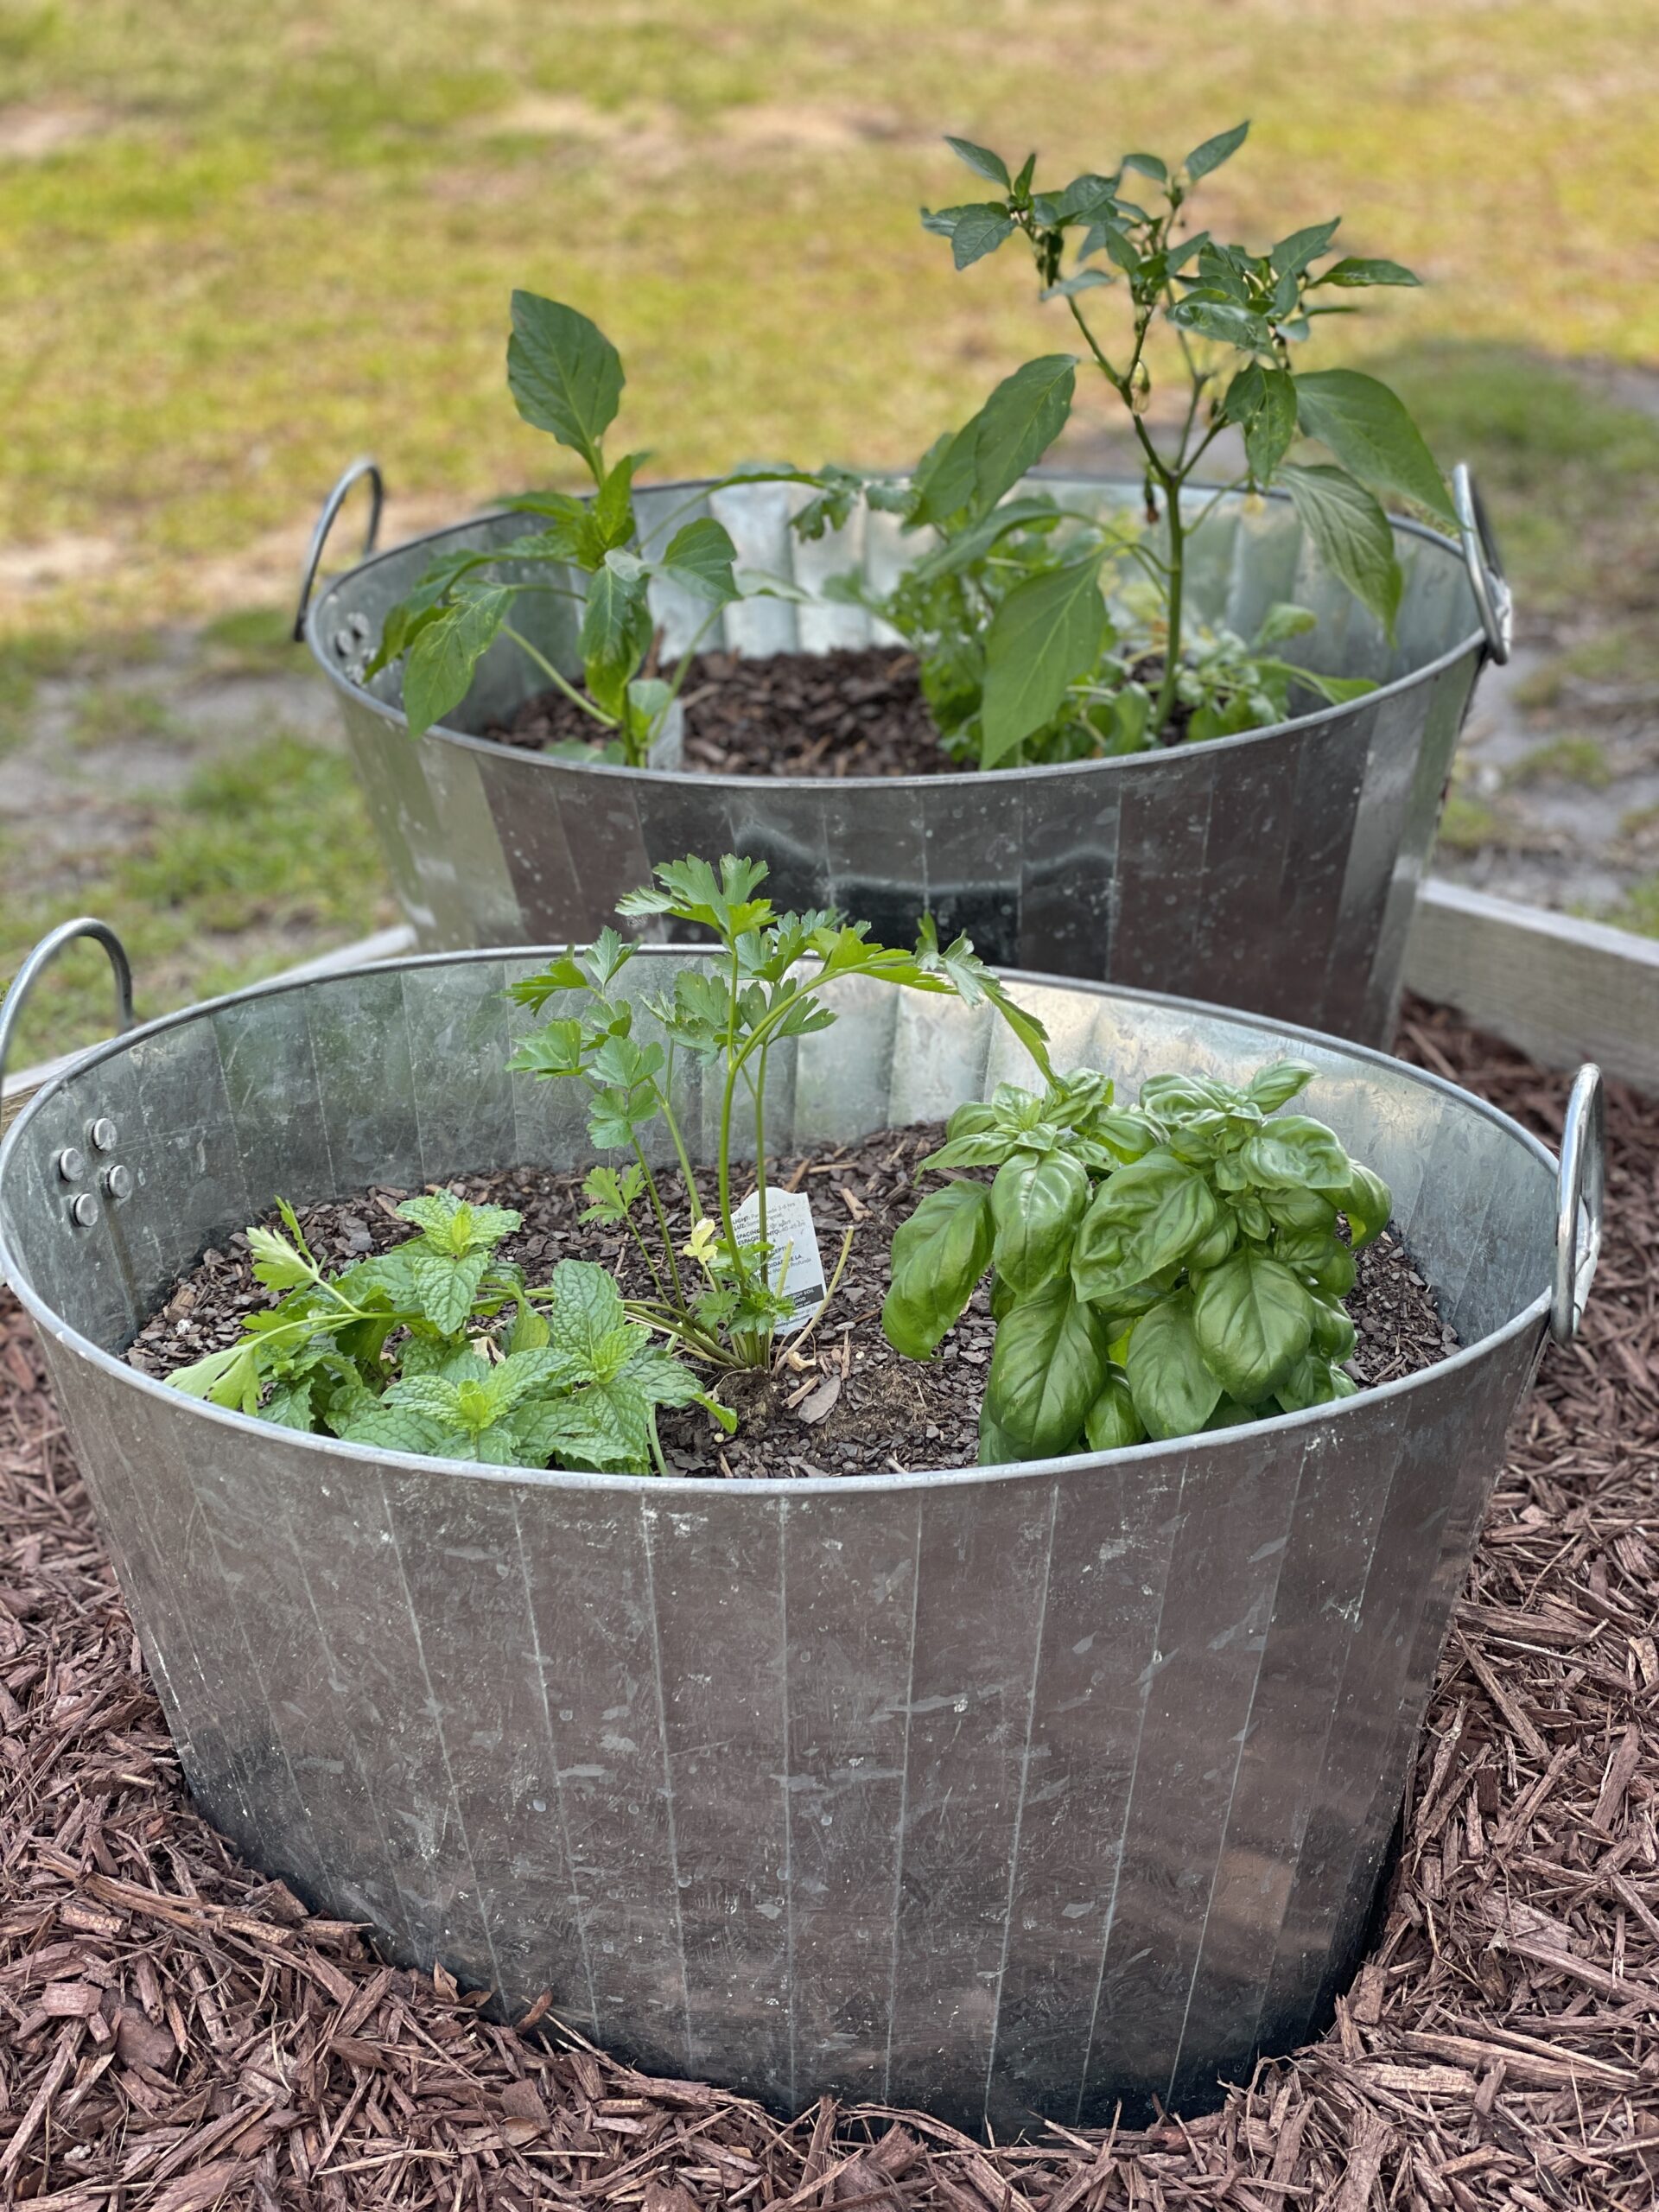 Upcycled container herb garden made easy